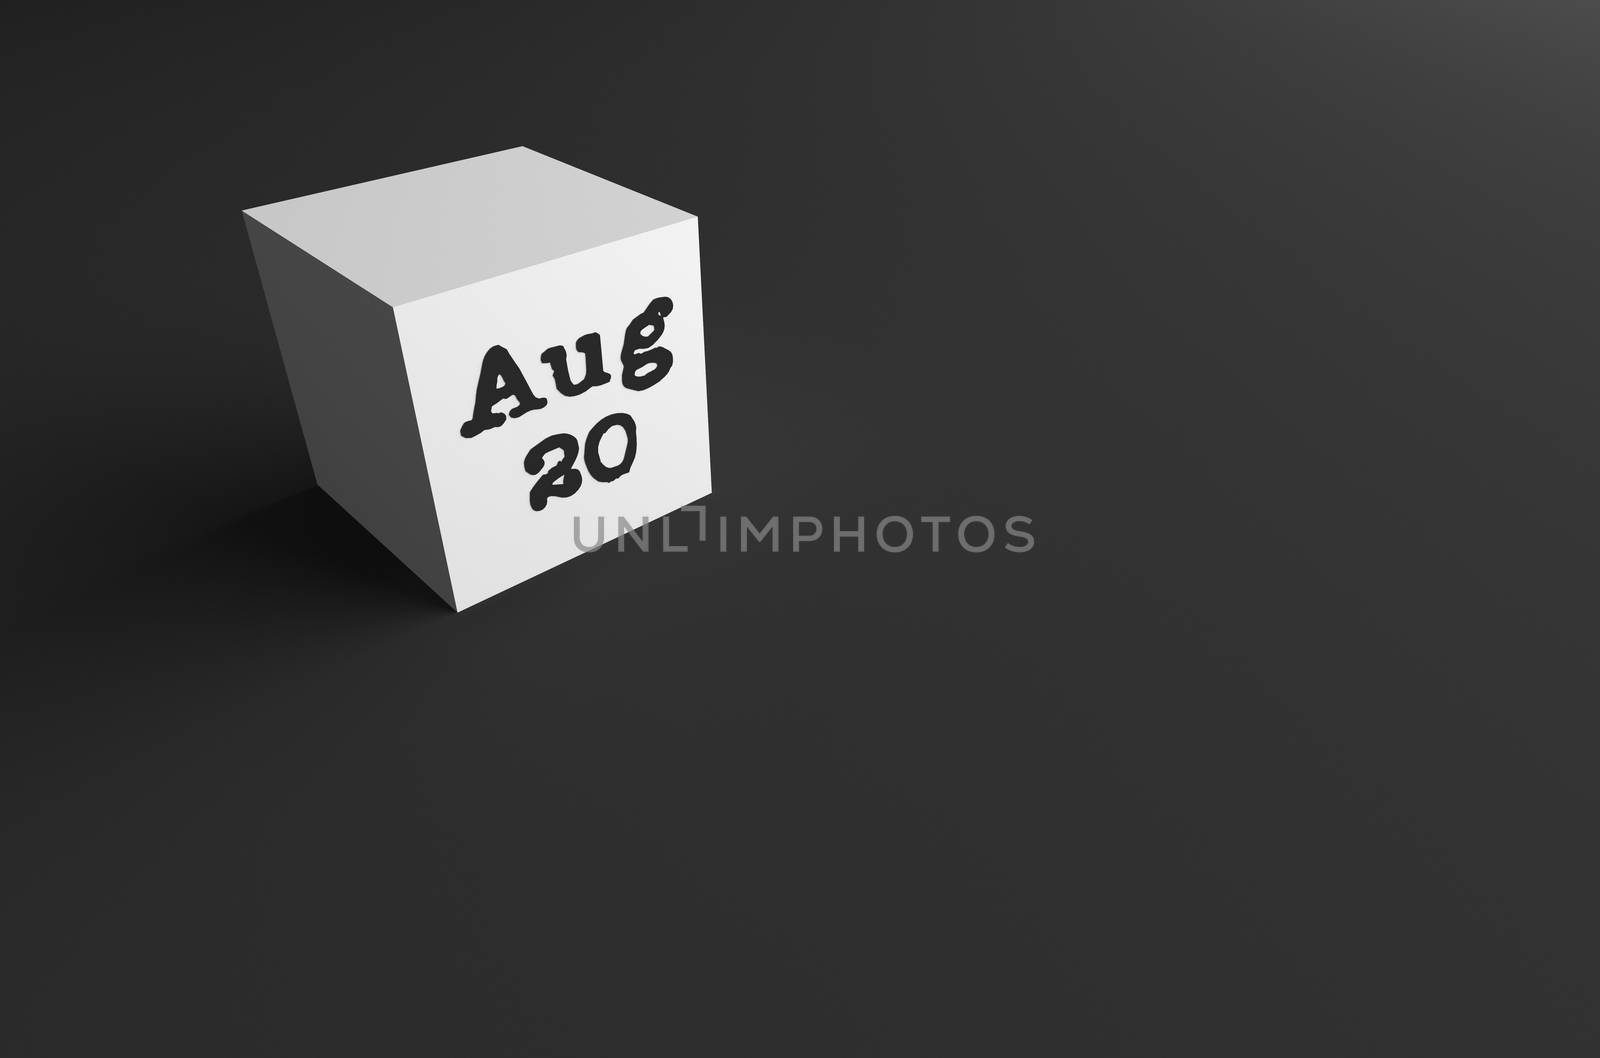 3D RENDERING OF Aug (ABBREVIATION OF AUGUST) 20 ON WHITE CUBE